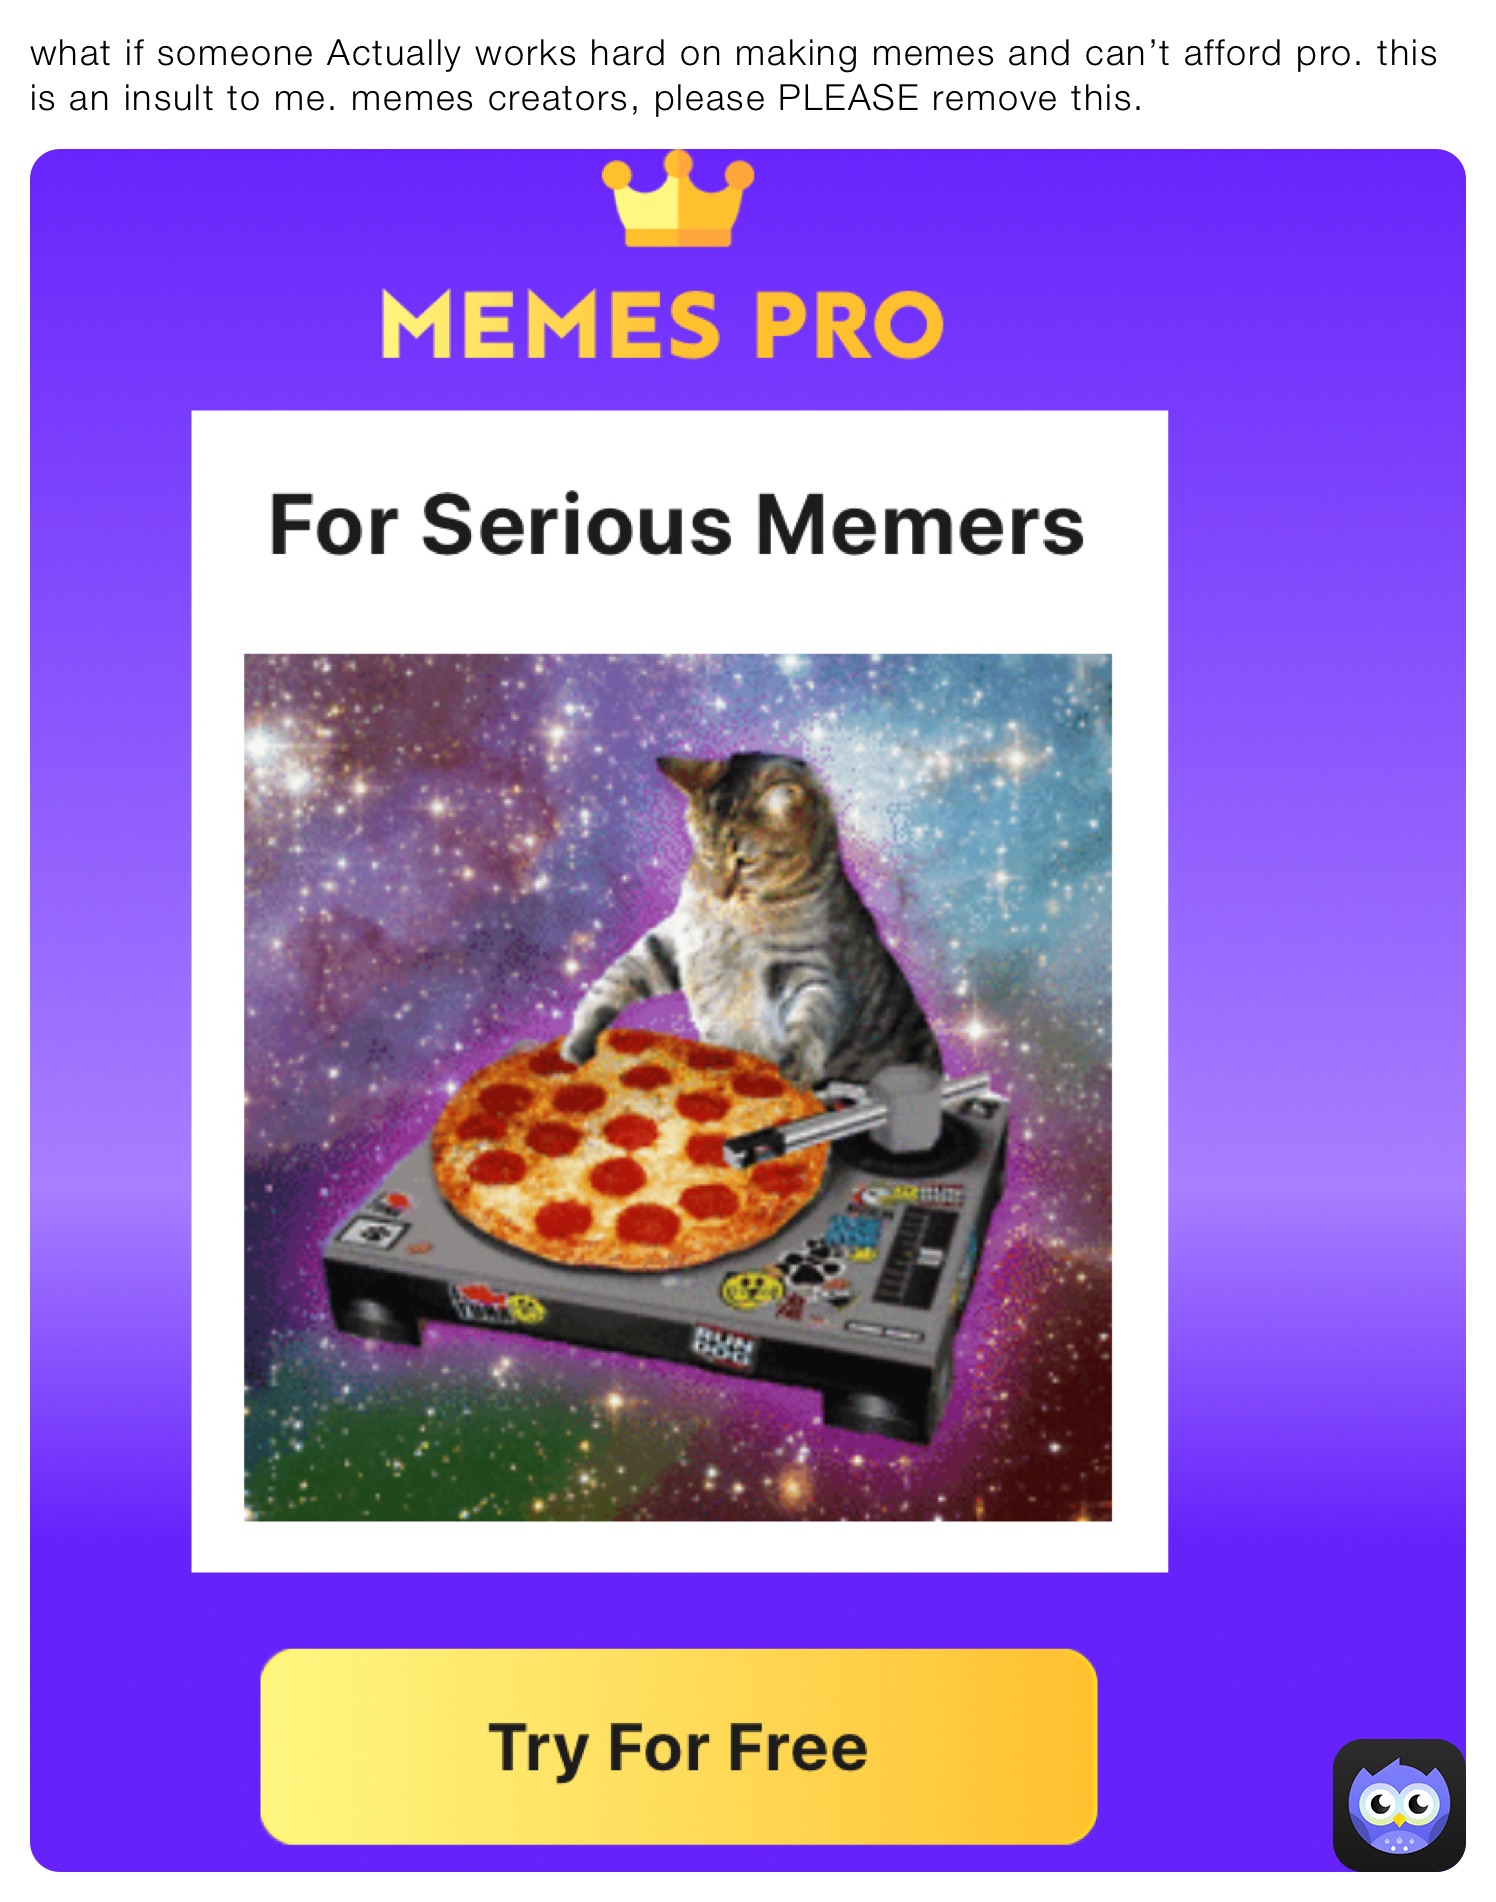 what if someone Actually works hard on making memes and can’t afford pro. this is an insult to me. memes creators, please PLEASE remove this.￼￼￼￼